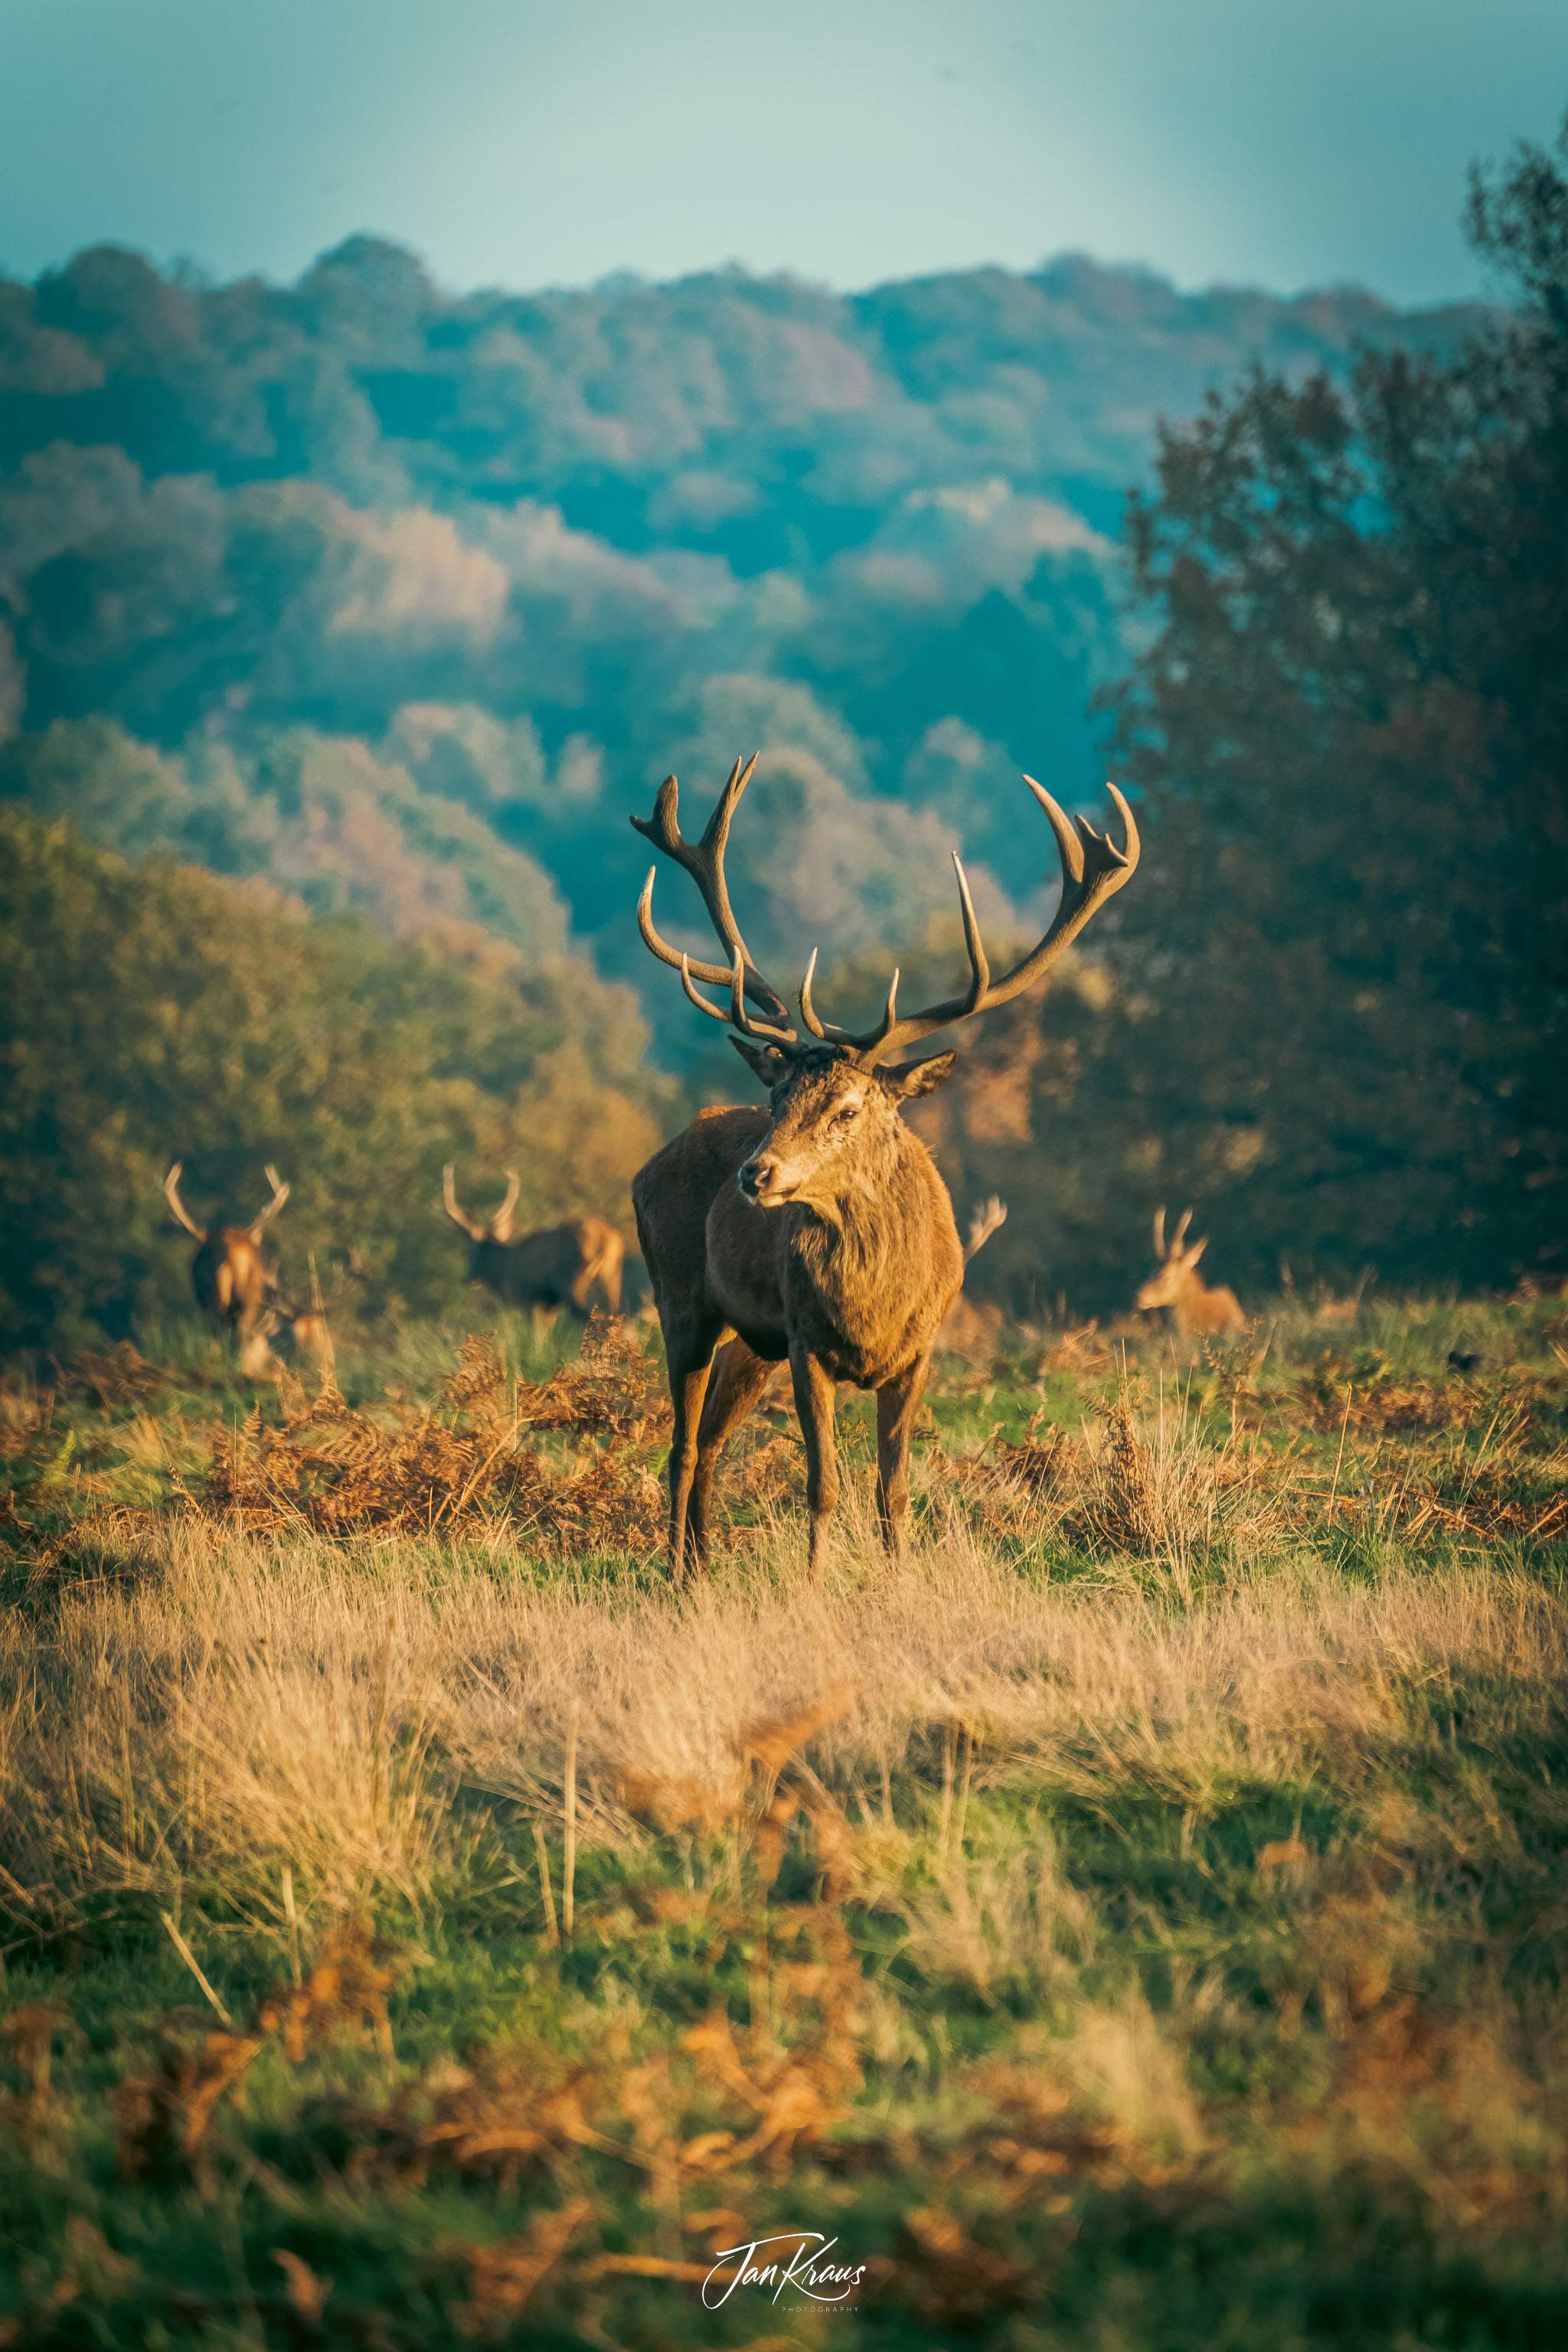 A red deer spotted in Richmond Park, London, UK